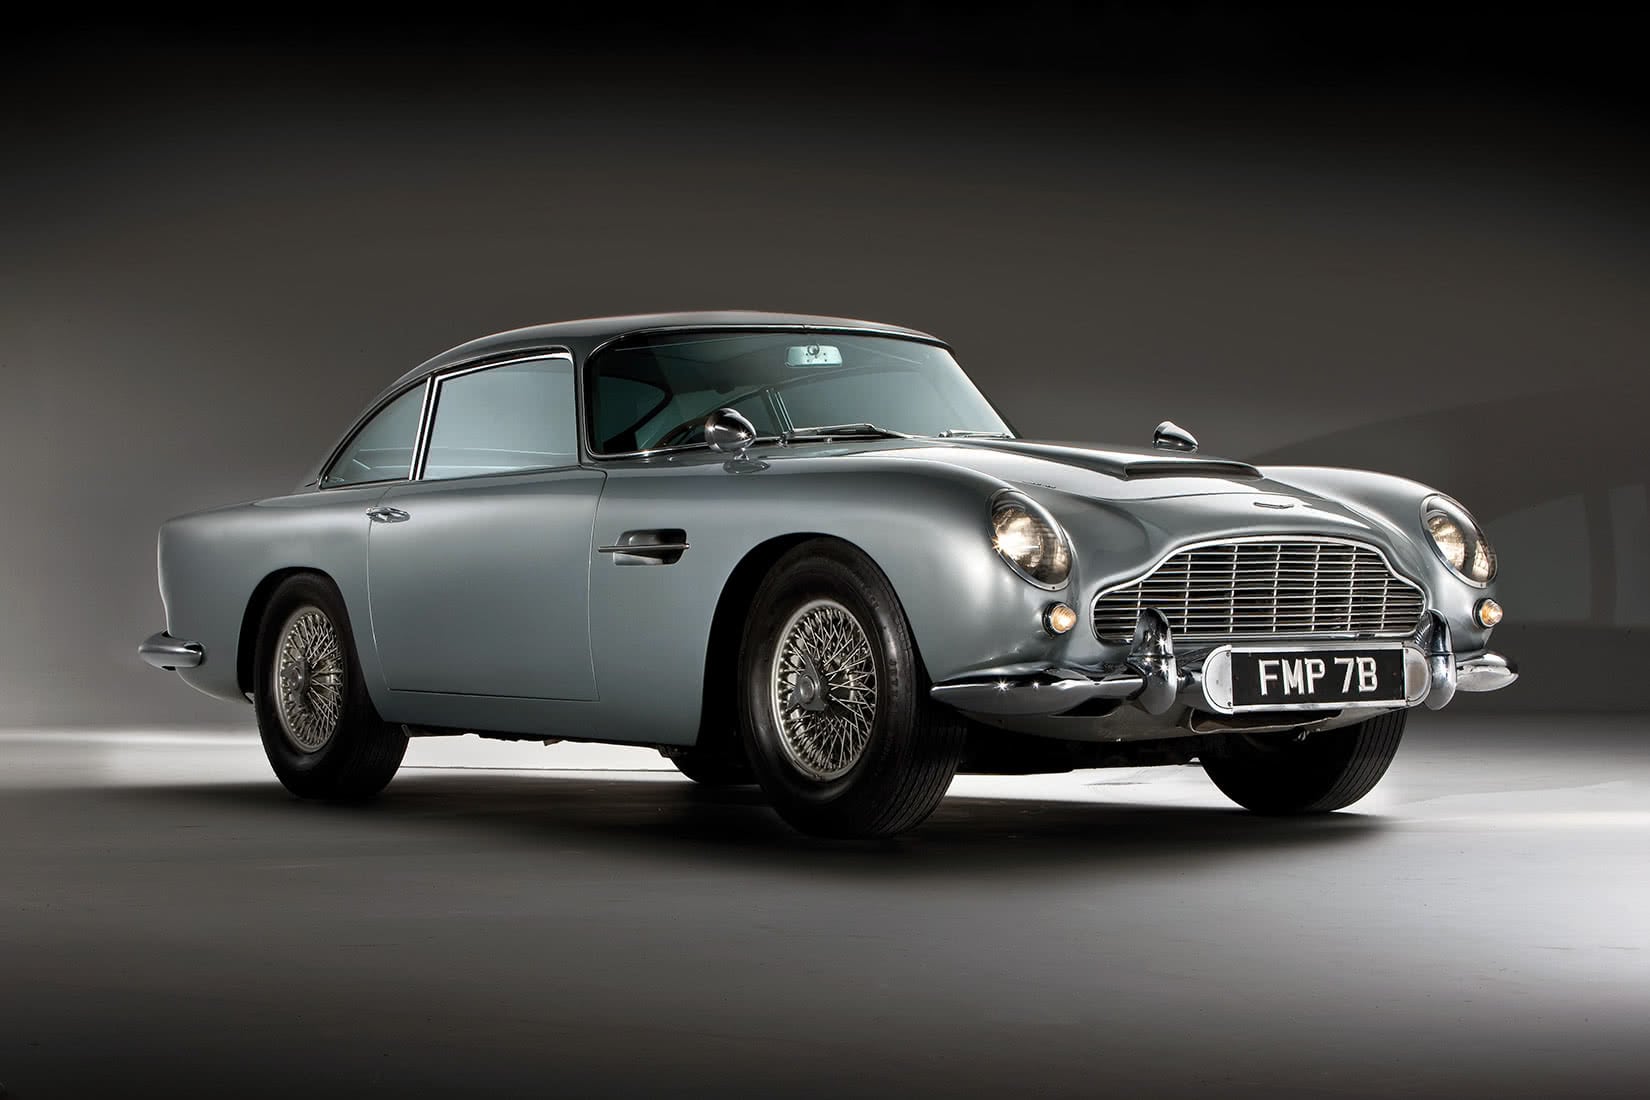 Top 7 Most Popular Classic Cars of All Time